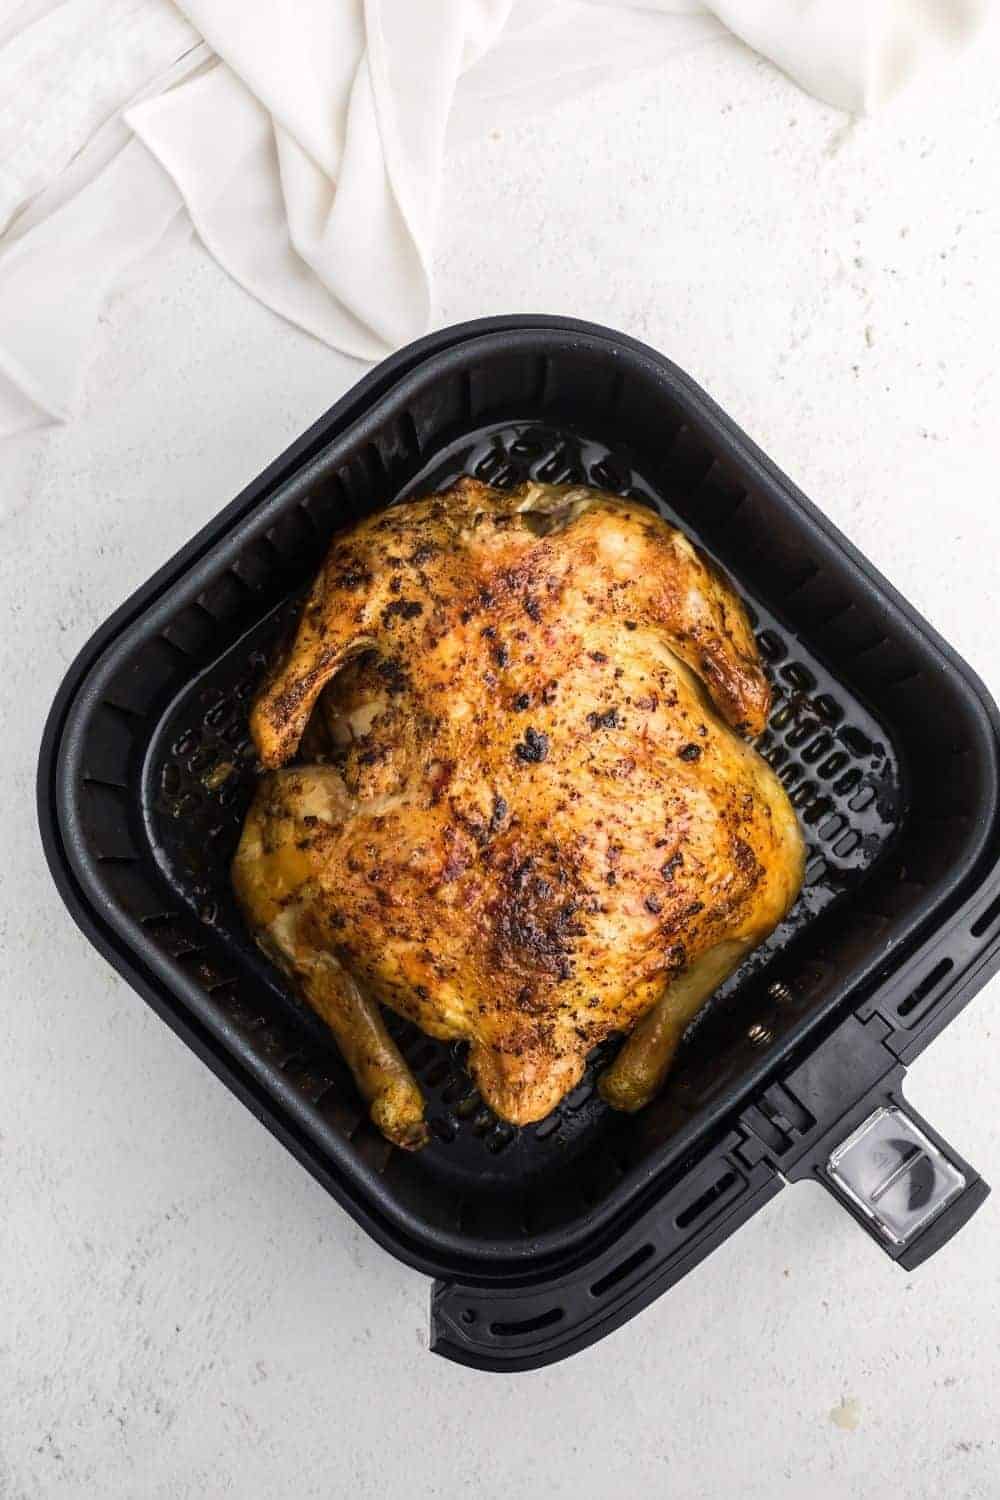 https://www.everydayfamilycooking.com/wp-content/uploads/2021/02/air-fryer-whole-chicken2.jpg